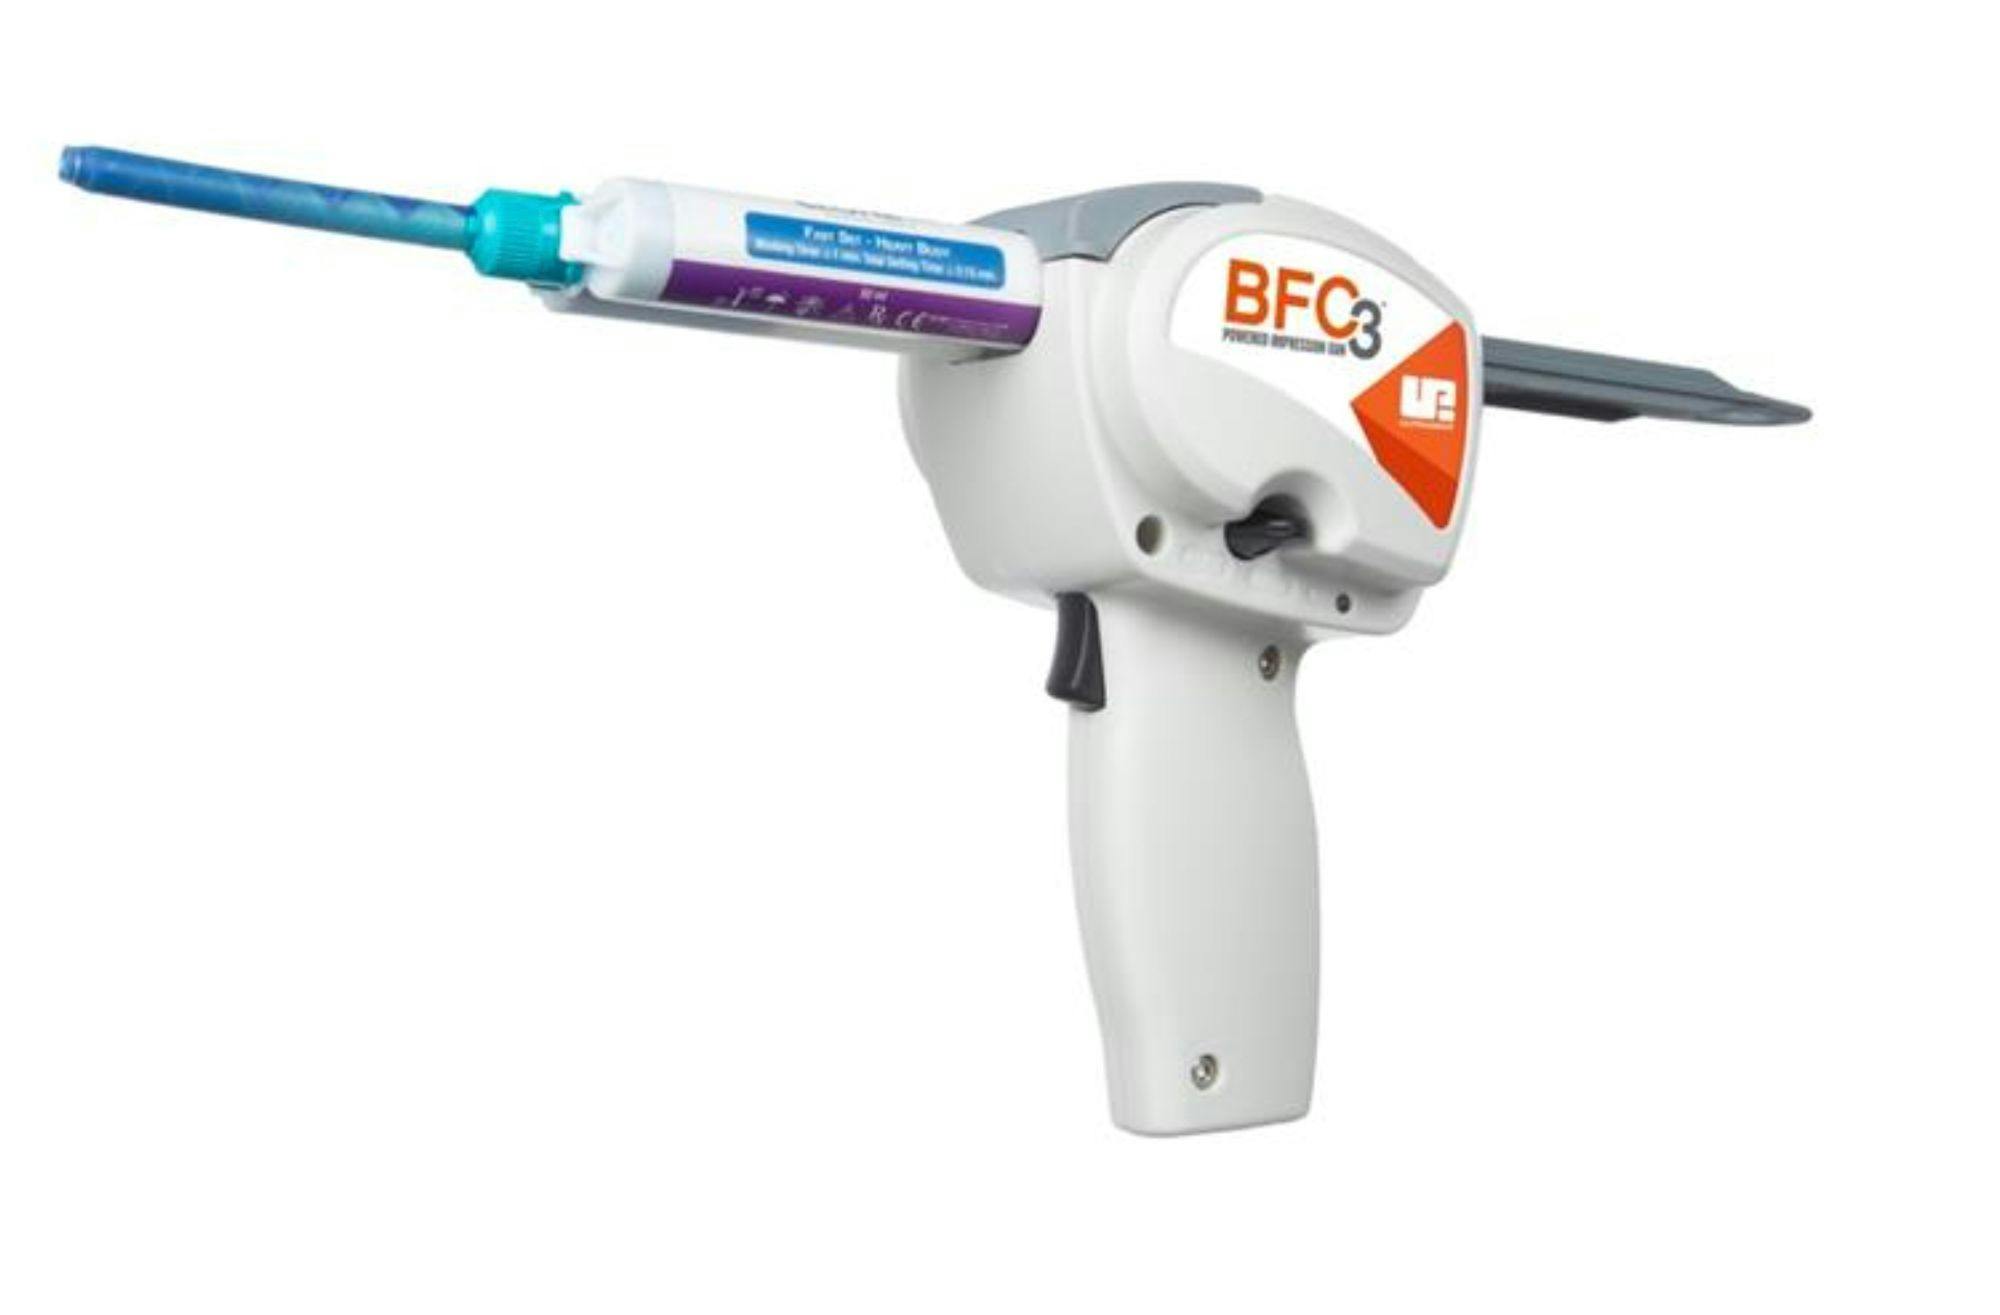 Ultradent Launches BFC3™ Powered Impression Gun. Image: © Ultradent Products, Inc. 